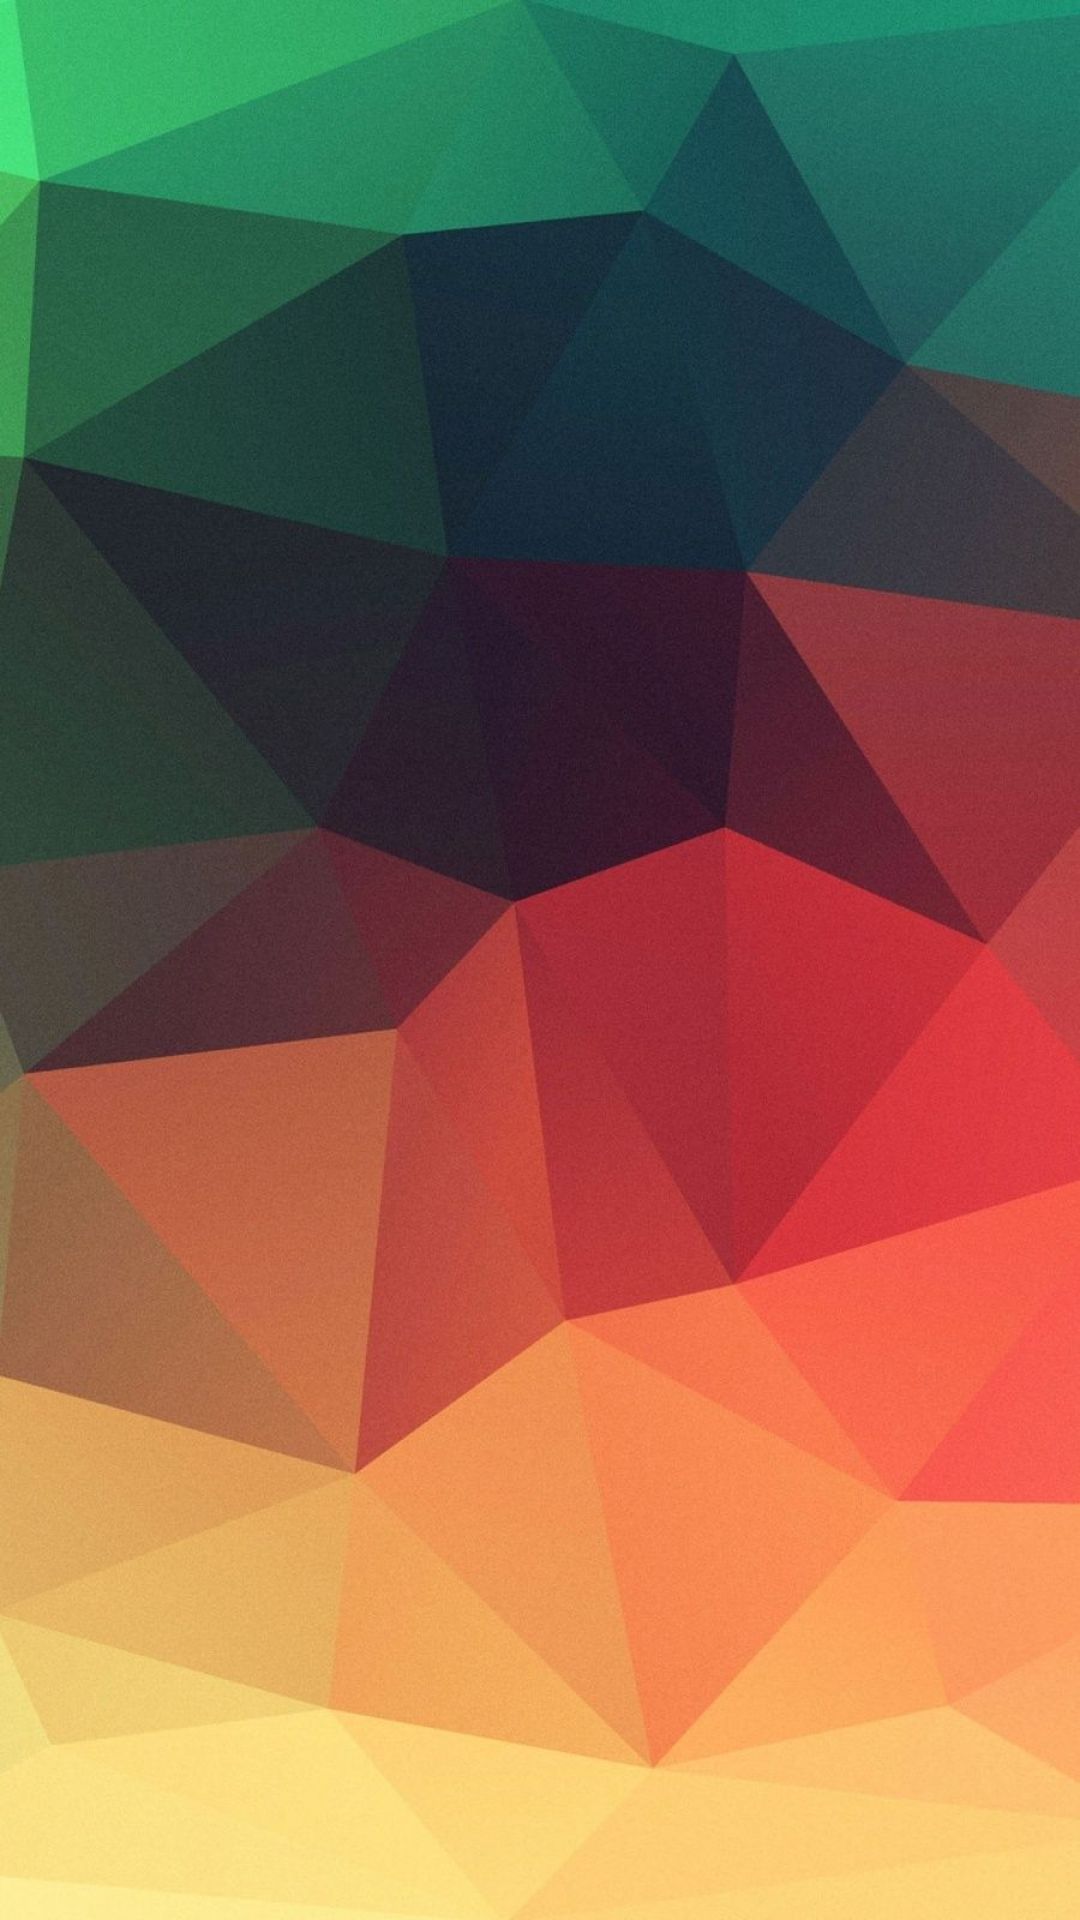 Green Polygon HD Wallpaper Desktop Background / Android